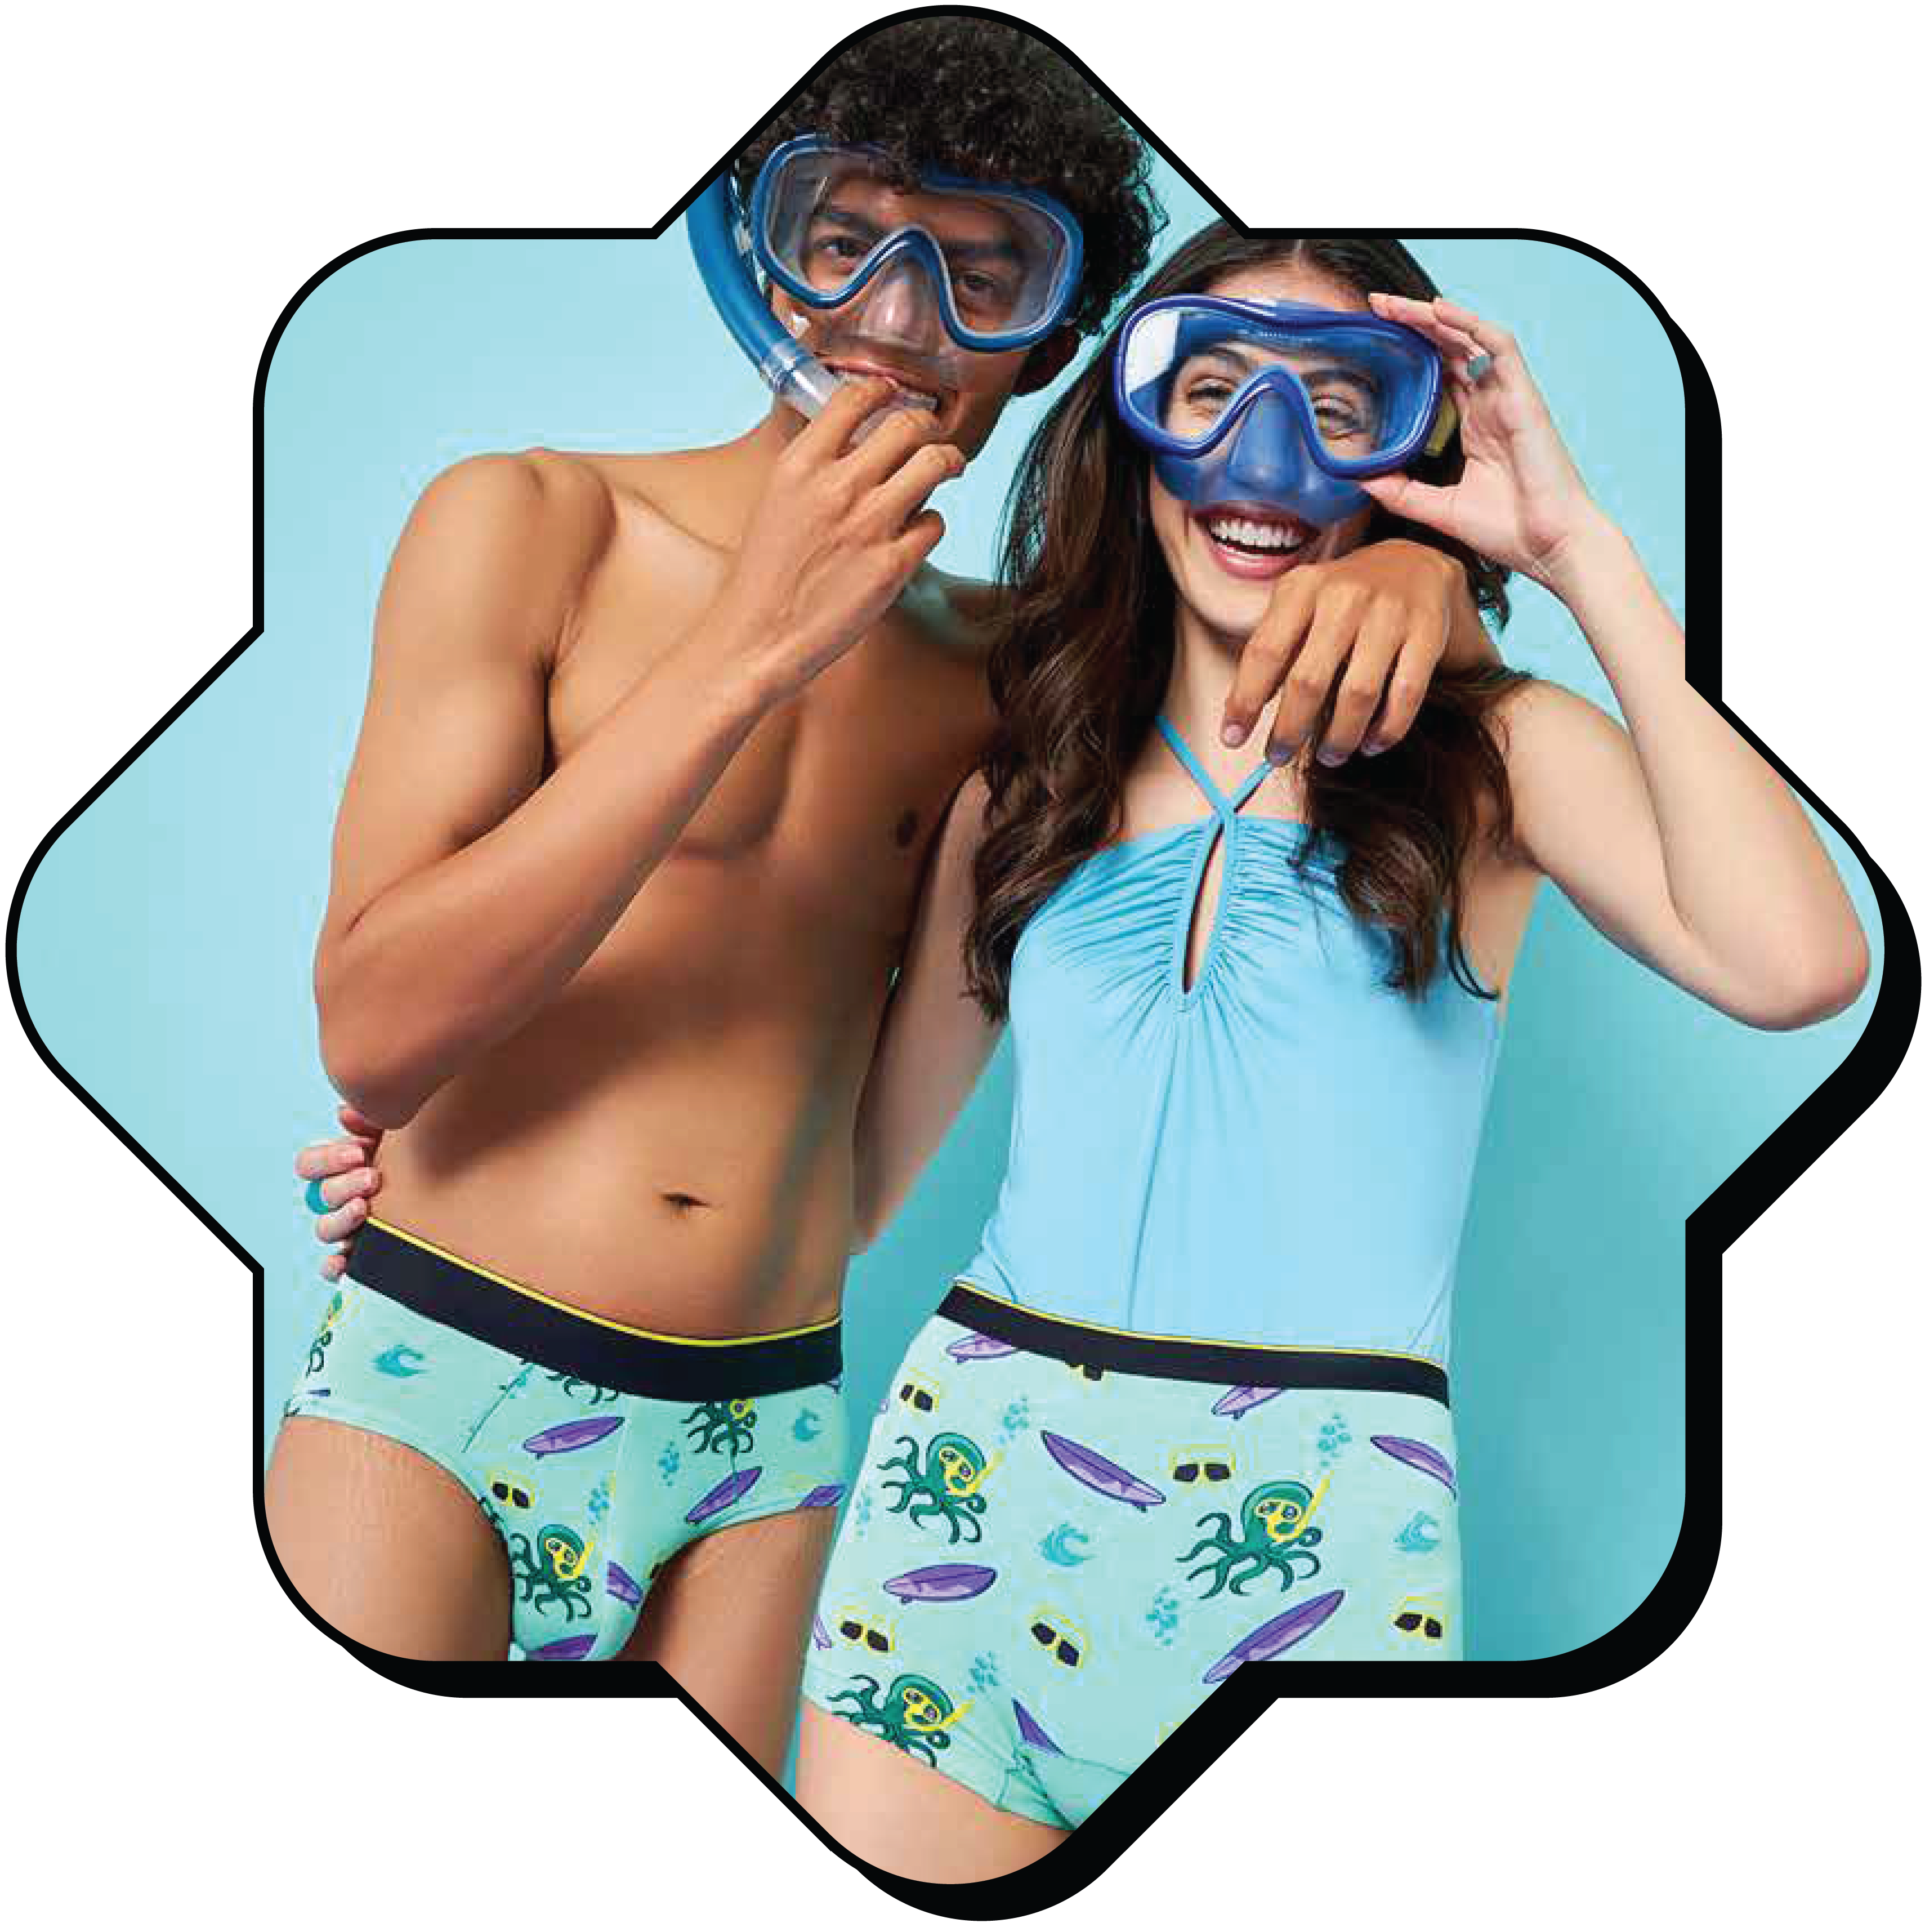 Mix & Match Underwear For Couples - Mens and Womens Underwear-To Make  Complete Set Select 3 Items Separately